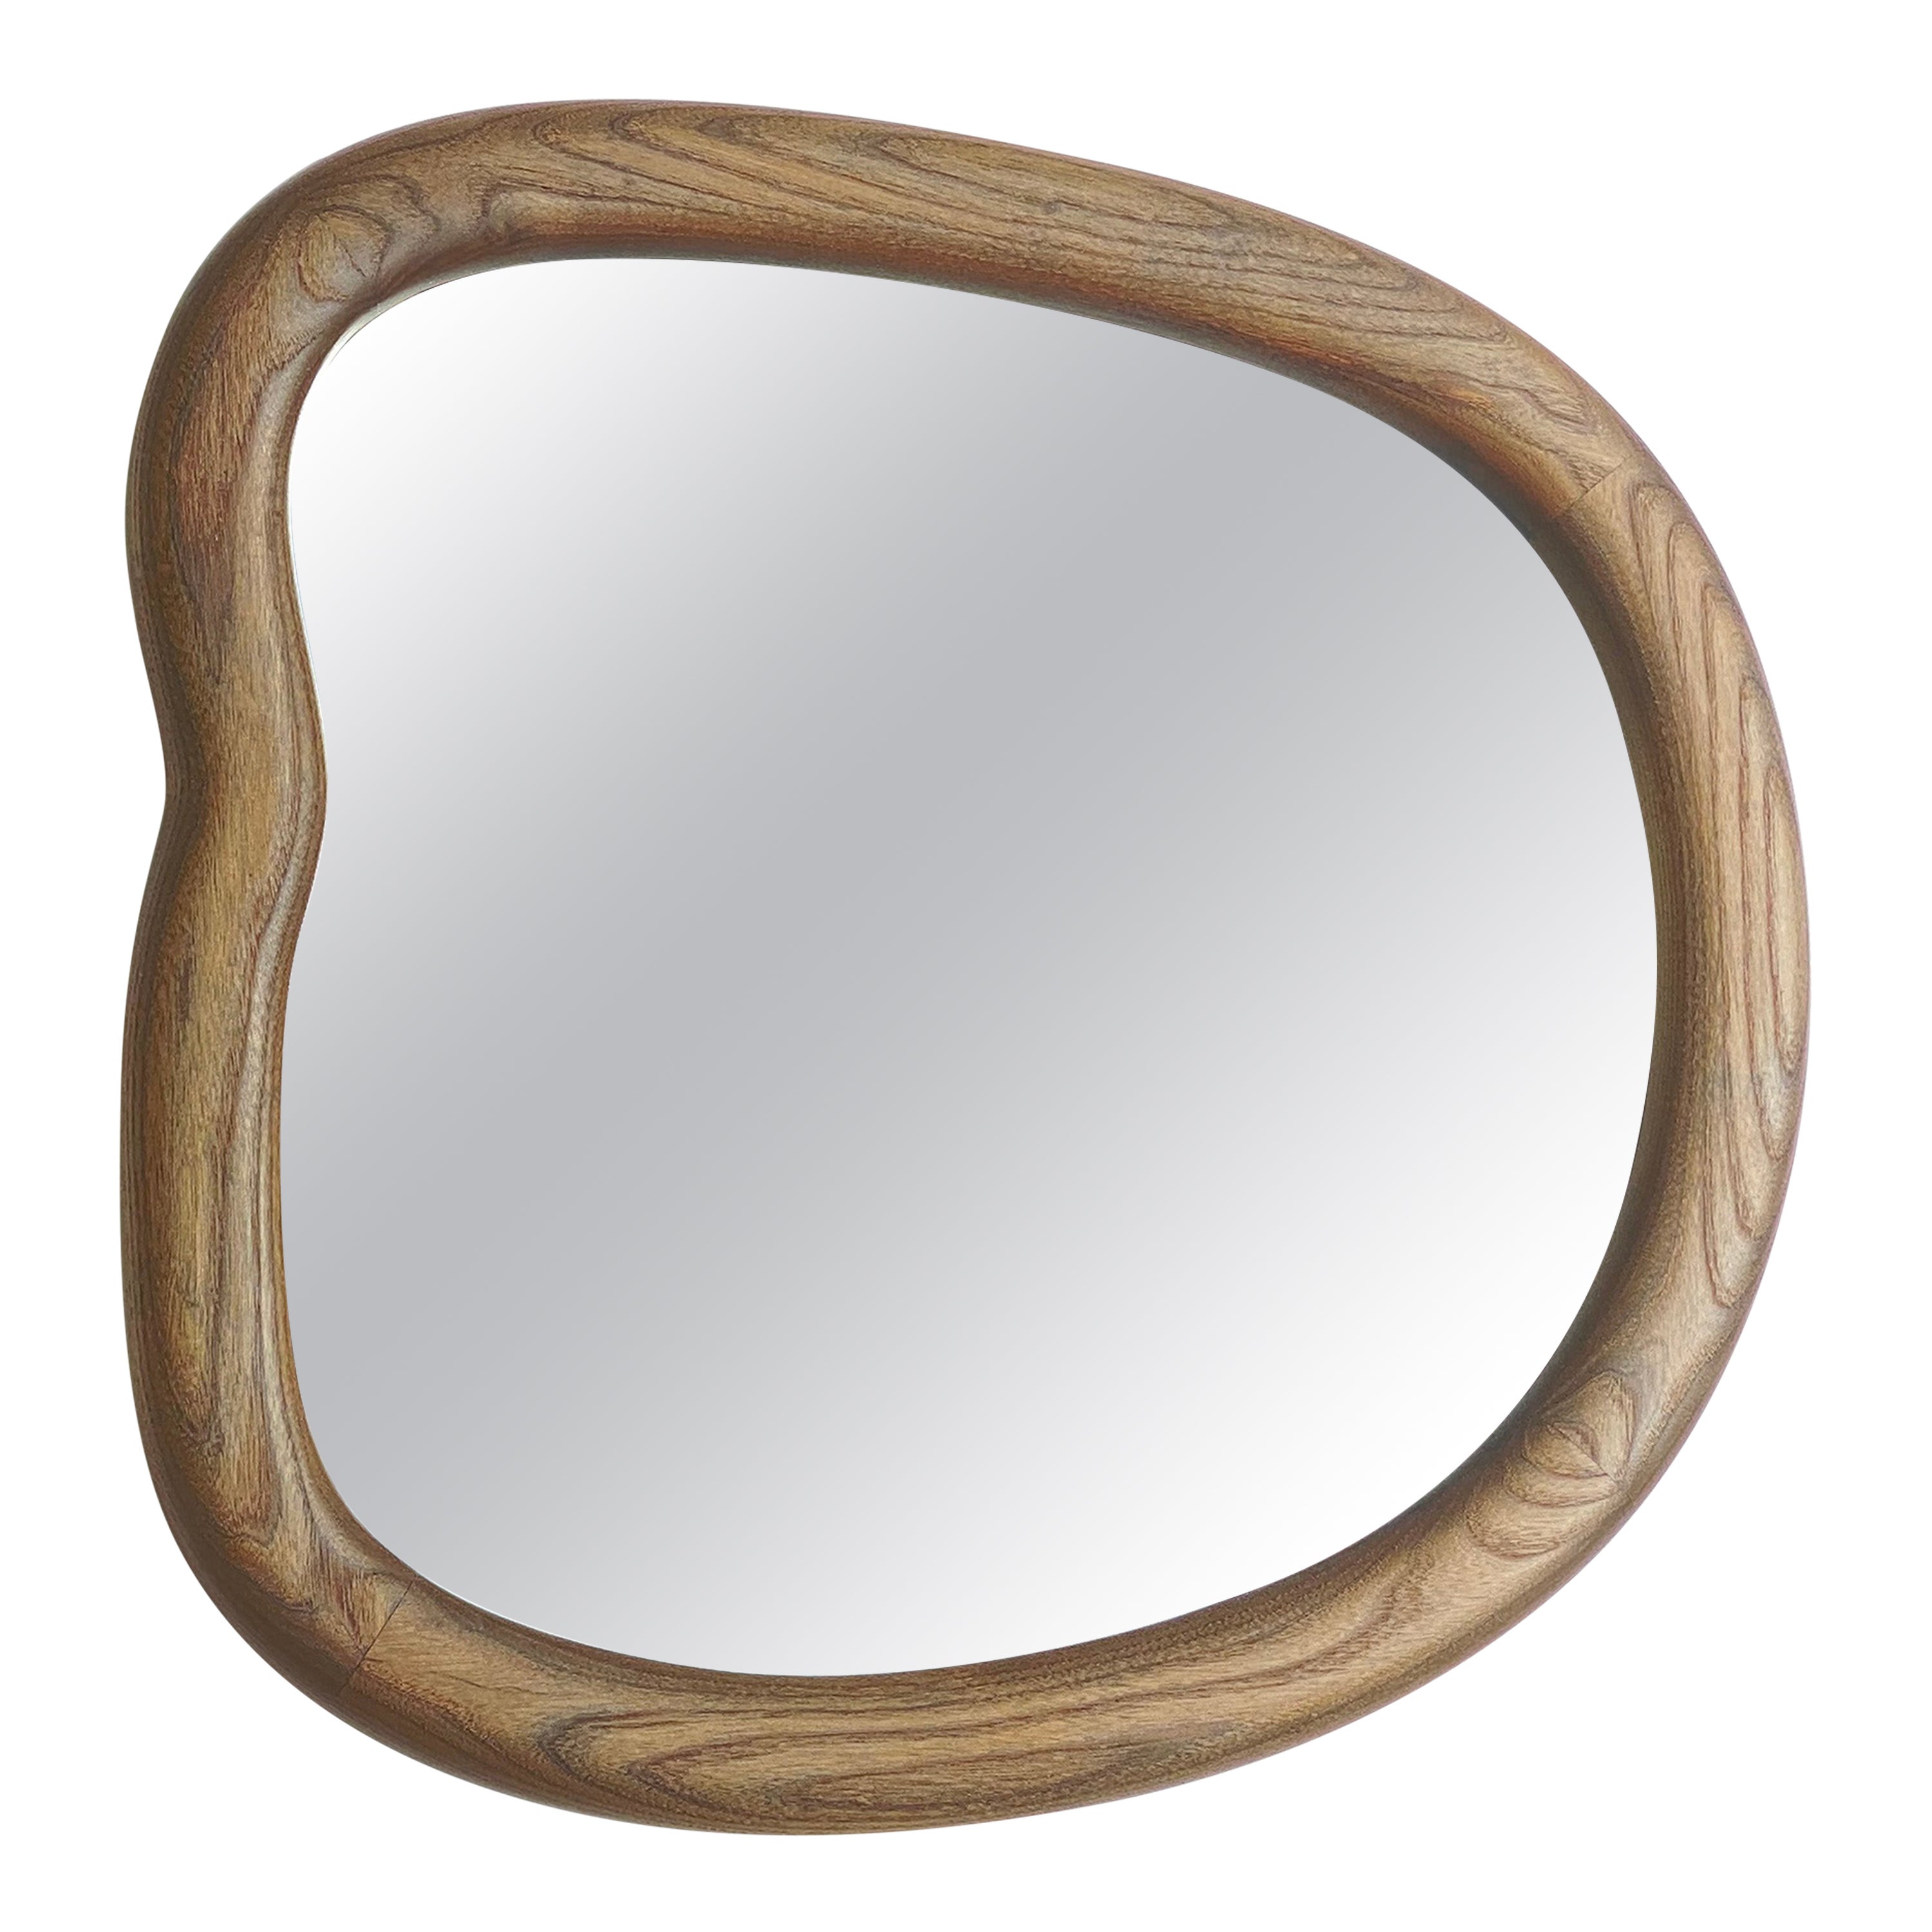 Sarpa mirror - small size wall mirror in weathered ash by KLN Studio For Sale